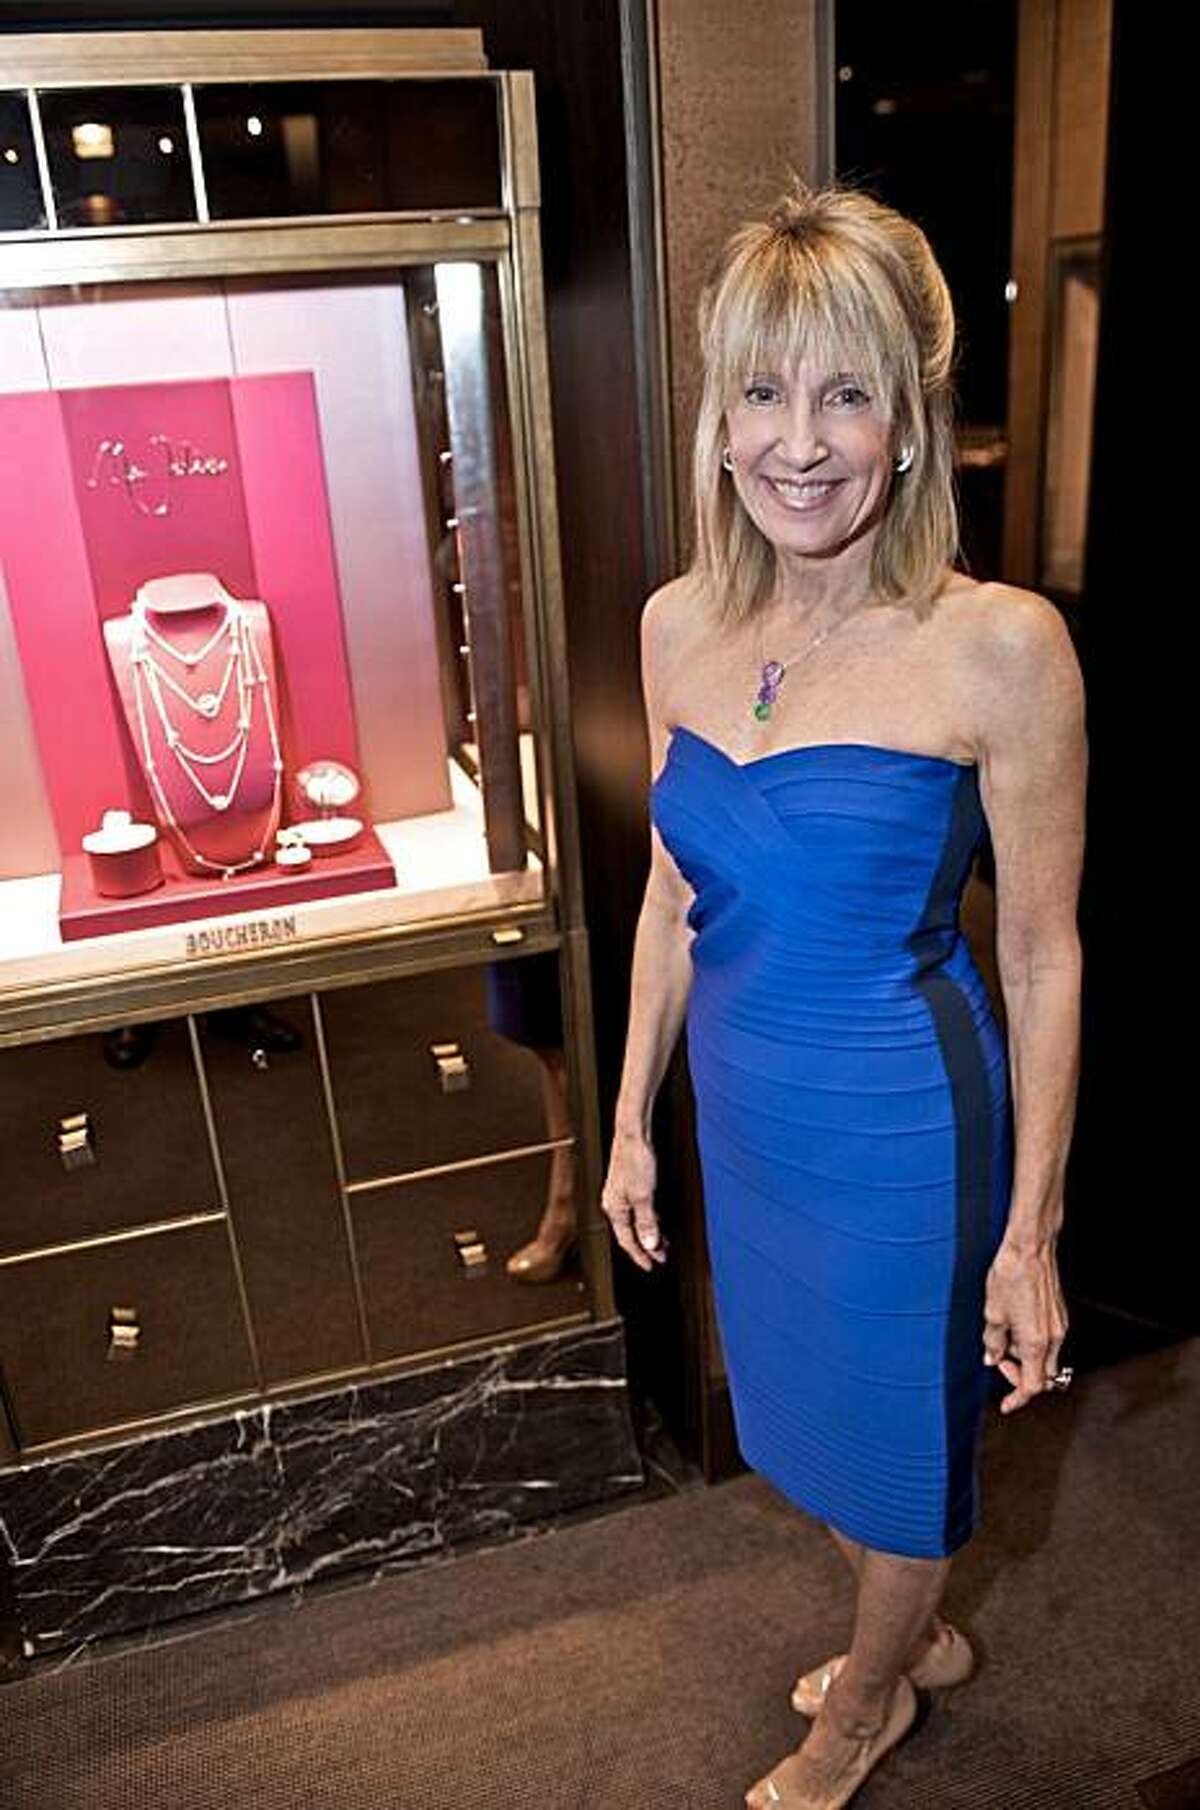 At the Boucheron jewelry boutique on Dec. 14, 2010, clothing designer Julie Panciroli debuted her latest line of made-to-measure upscale apparel. Here we see friend and stylist Sandy Mandel. Sandy Mandel